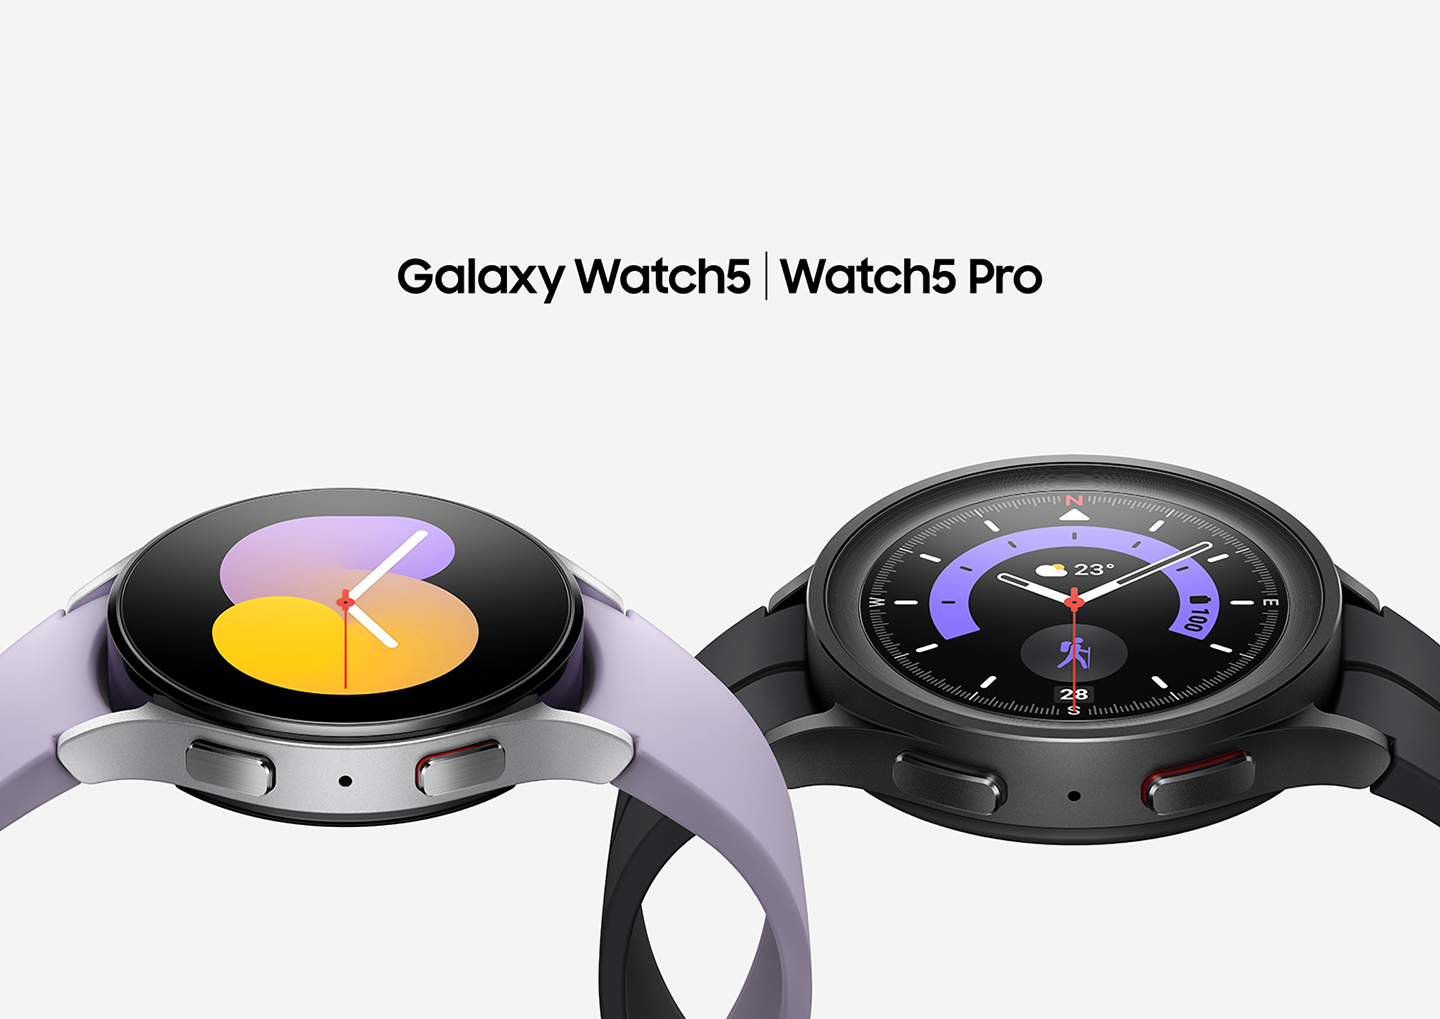 Samsung Leads Holistic Health Innovation with Galaxy Watch5 and